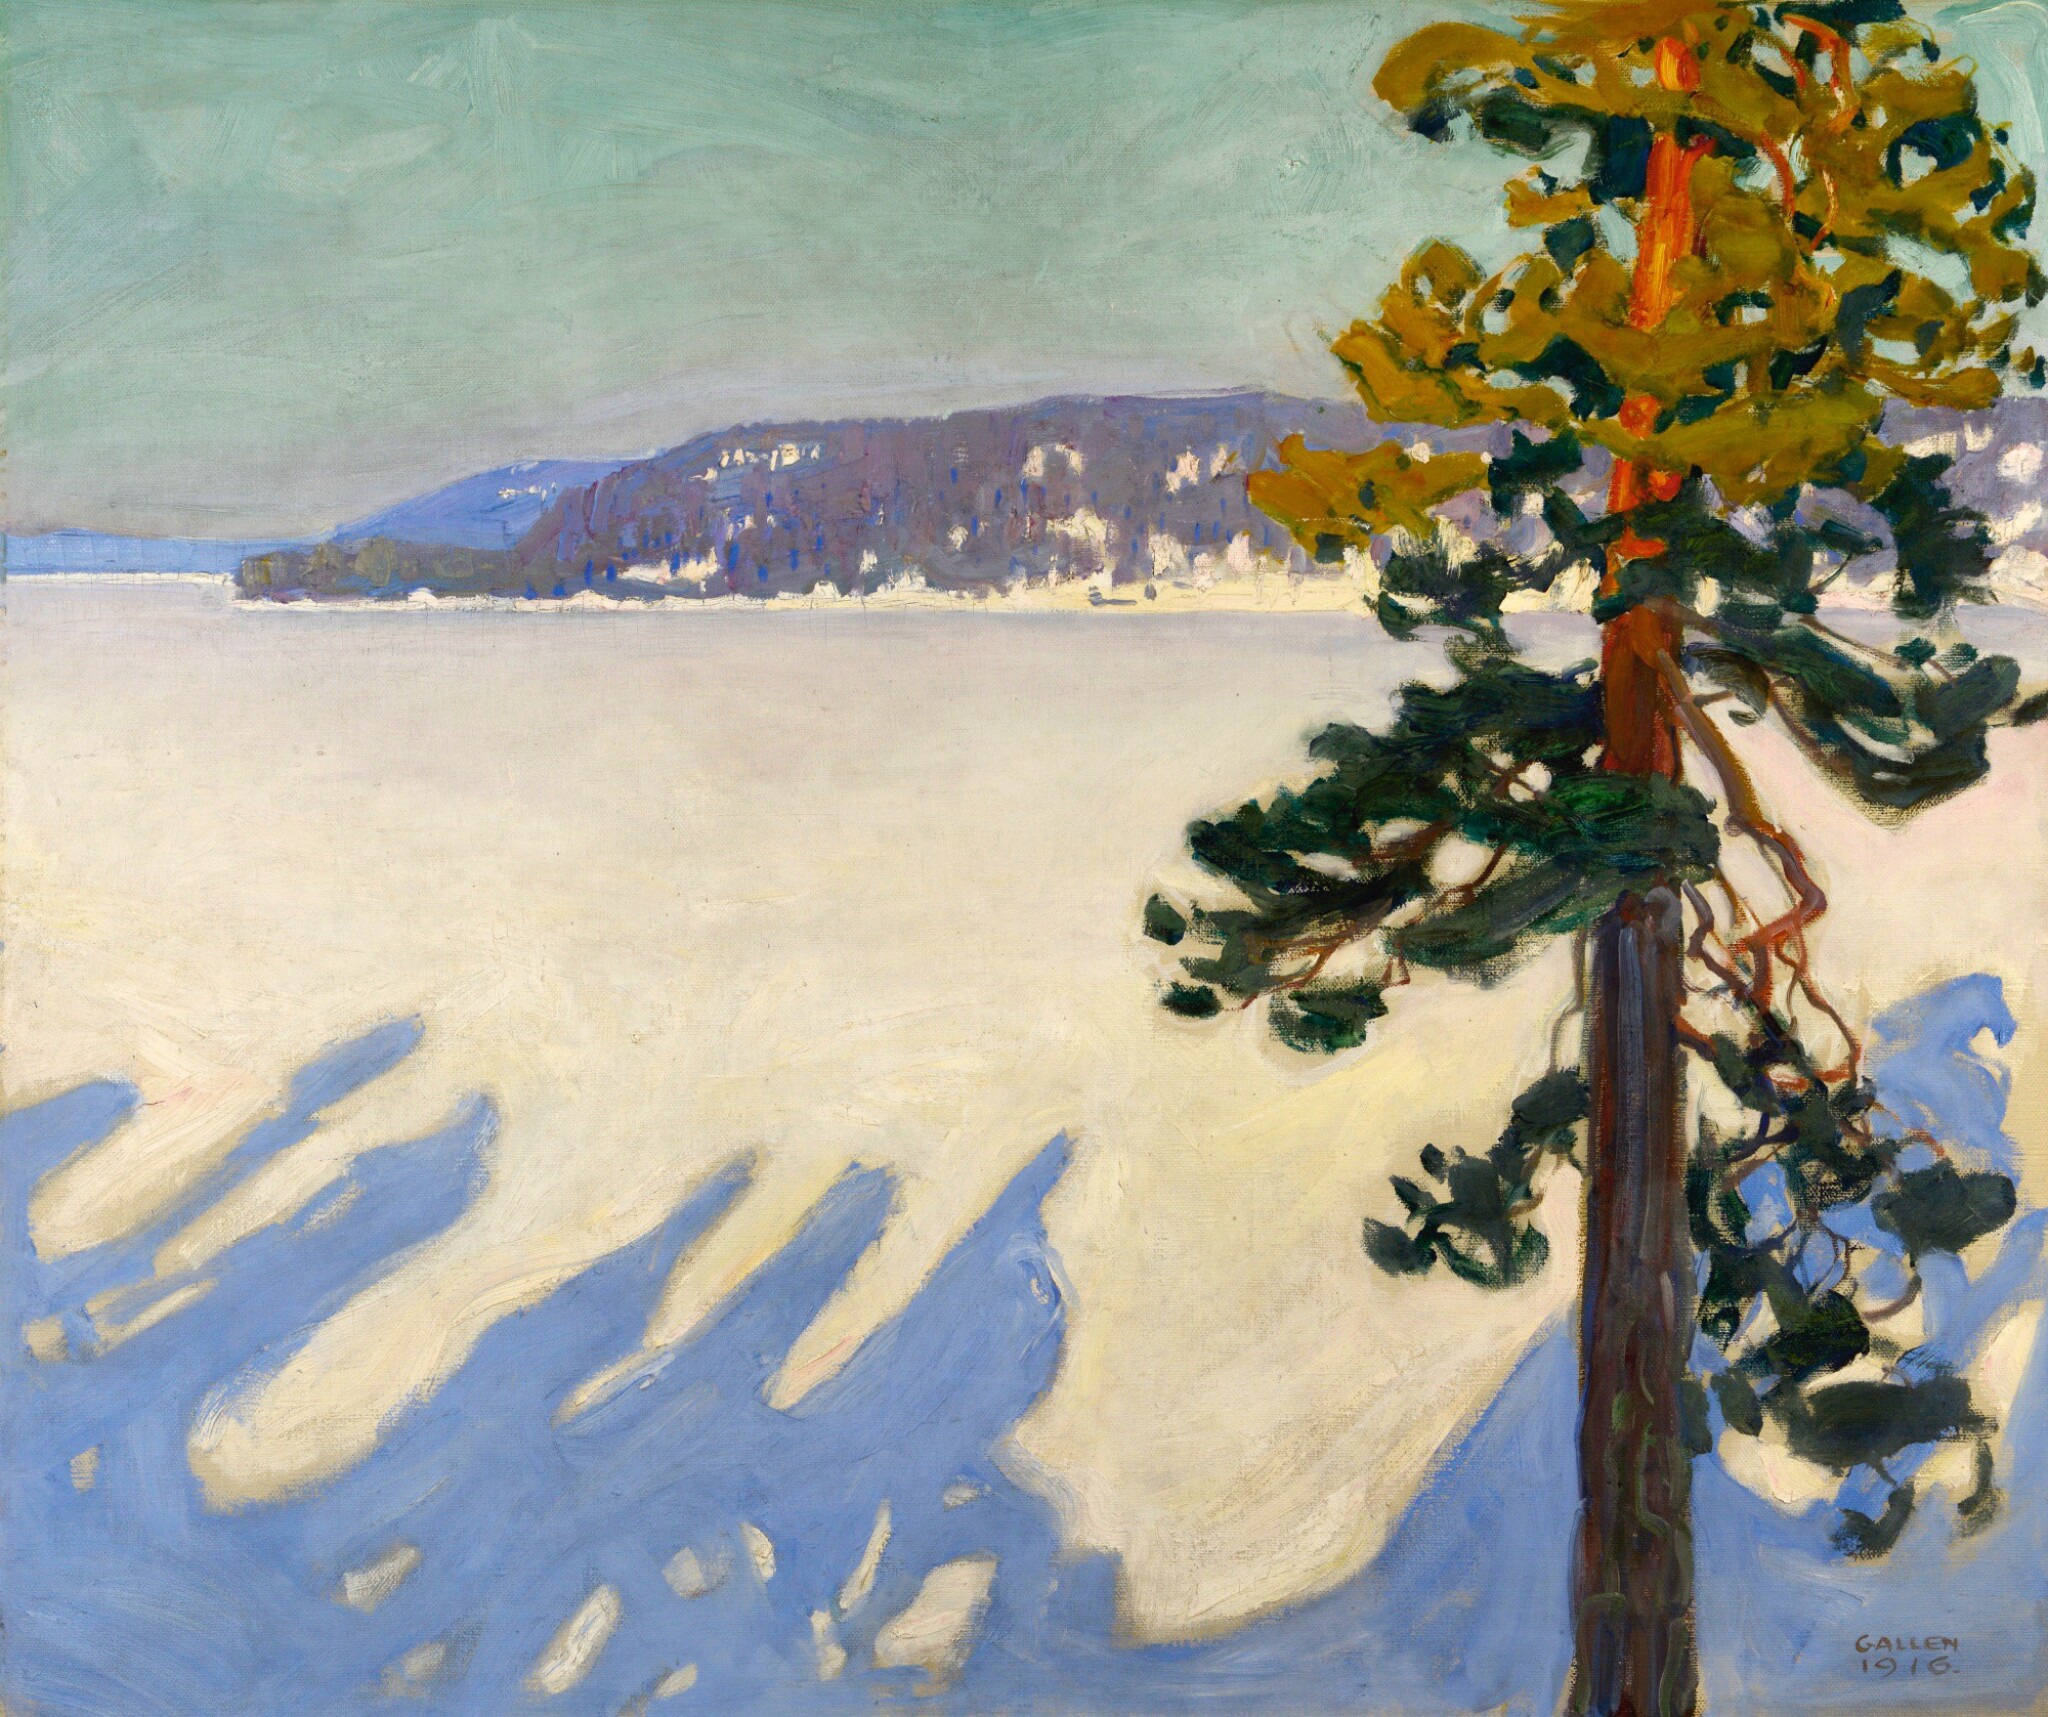 Lake Ruovesi in Winter by Akseli Gallen-Kallela - 1916 - 102 x 119.5 cm private collection